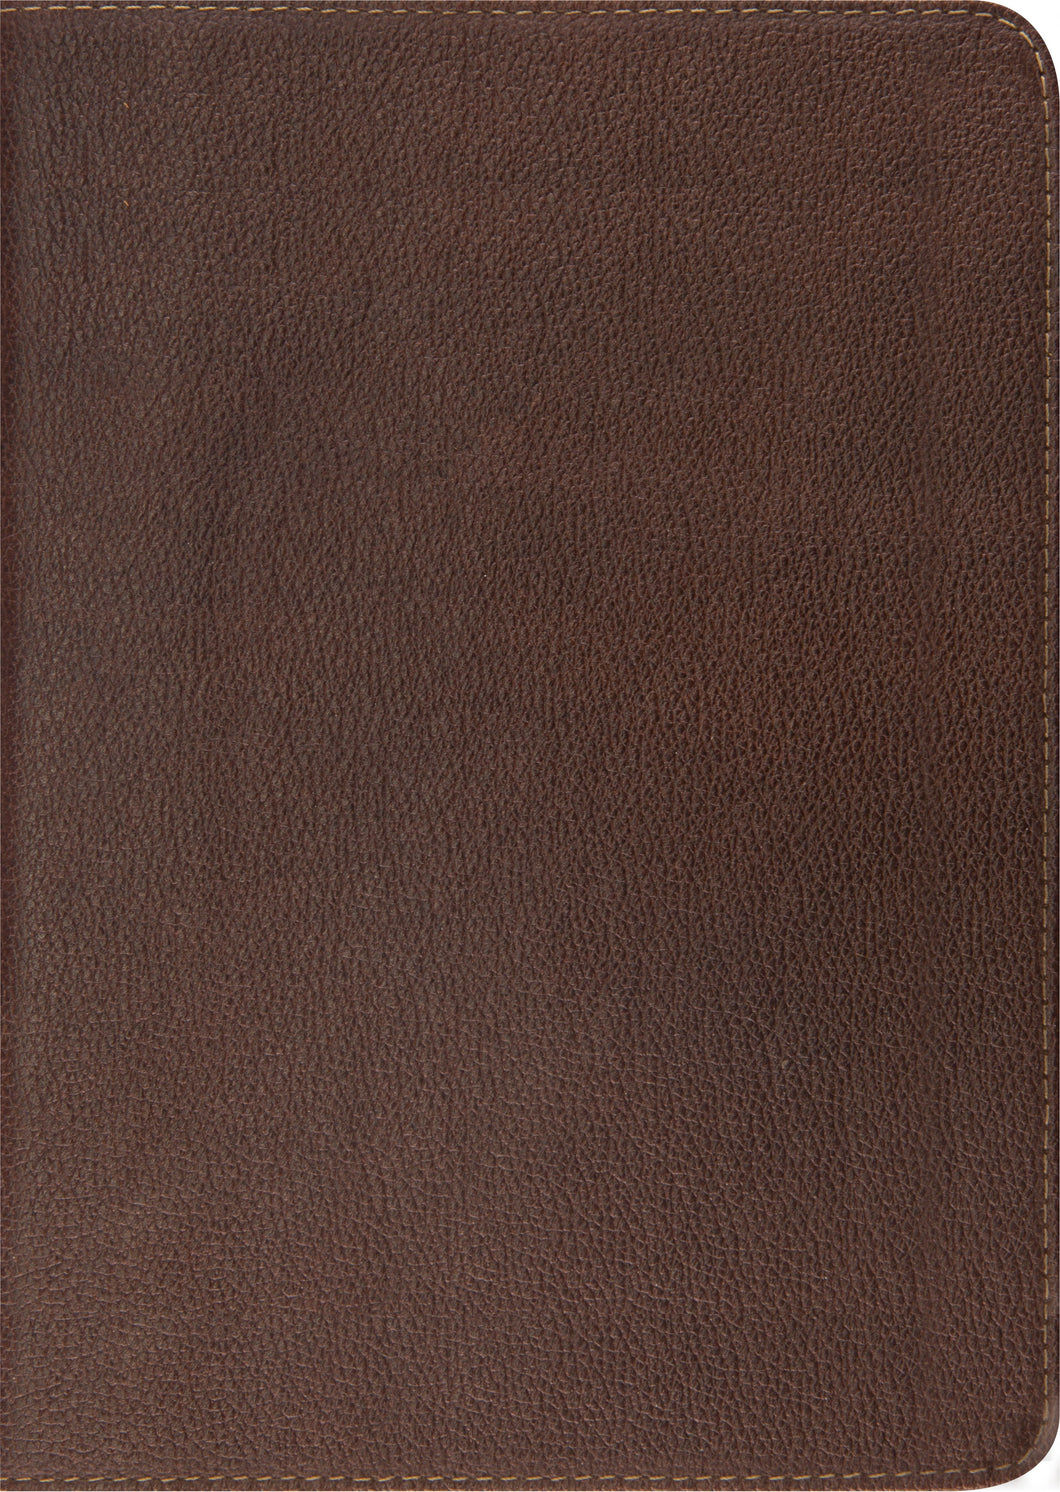 ESV Study Bible-Brown Cowhide Leather